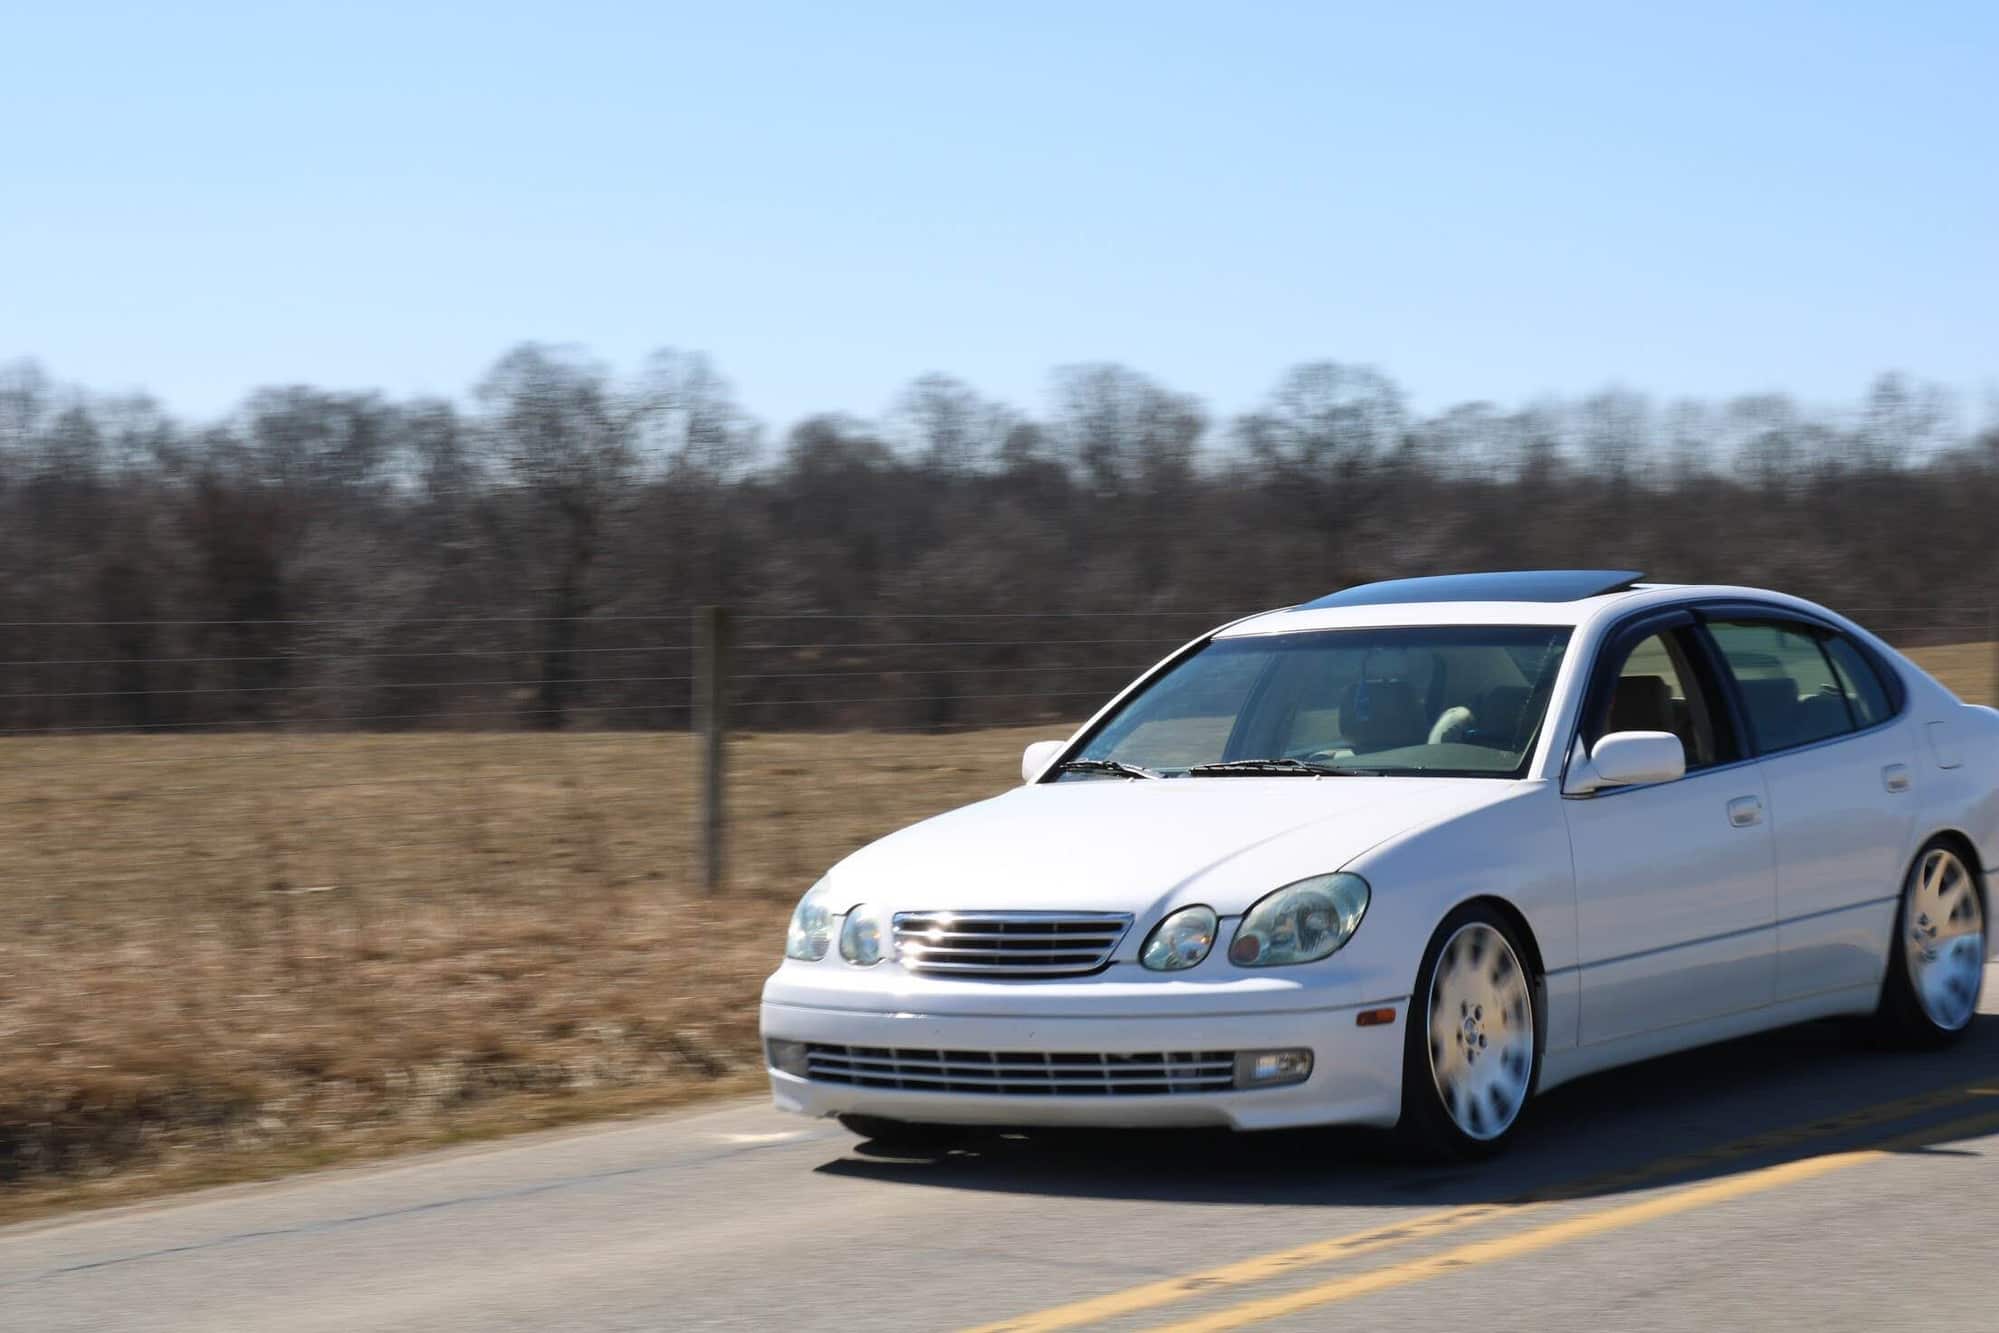 Gs300 lowered and want your thoughts - ClubLexus - Lexus Forum Discussion